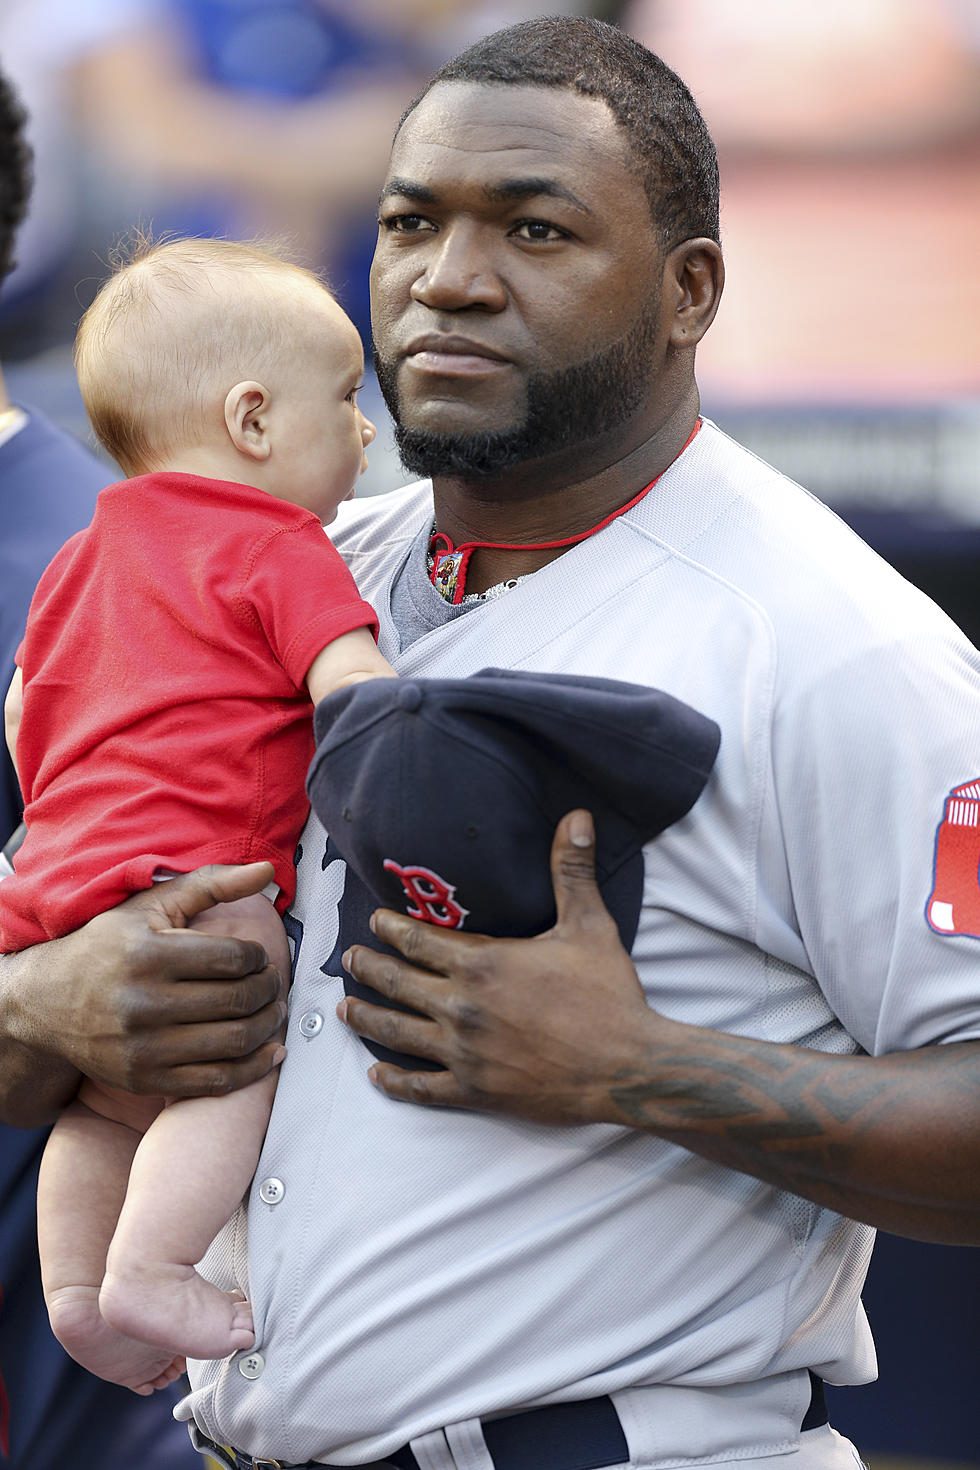 David Ortiz Poses With Fan’s Baby at Red Sox Royals Game